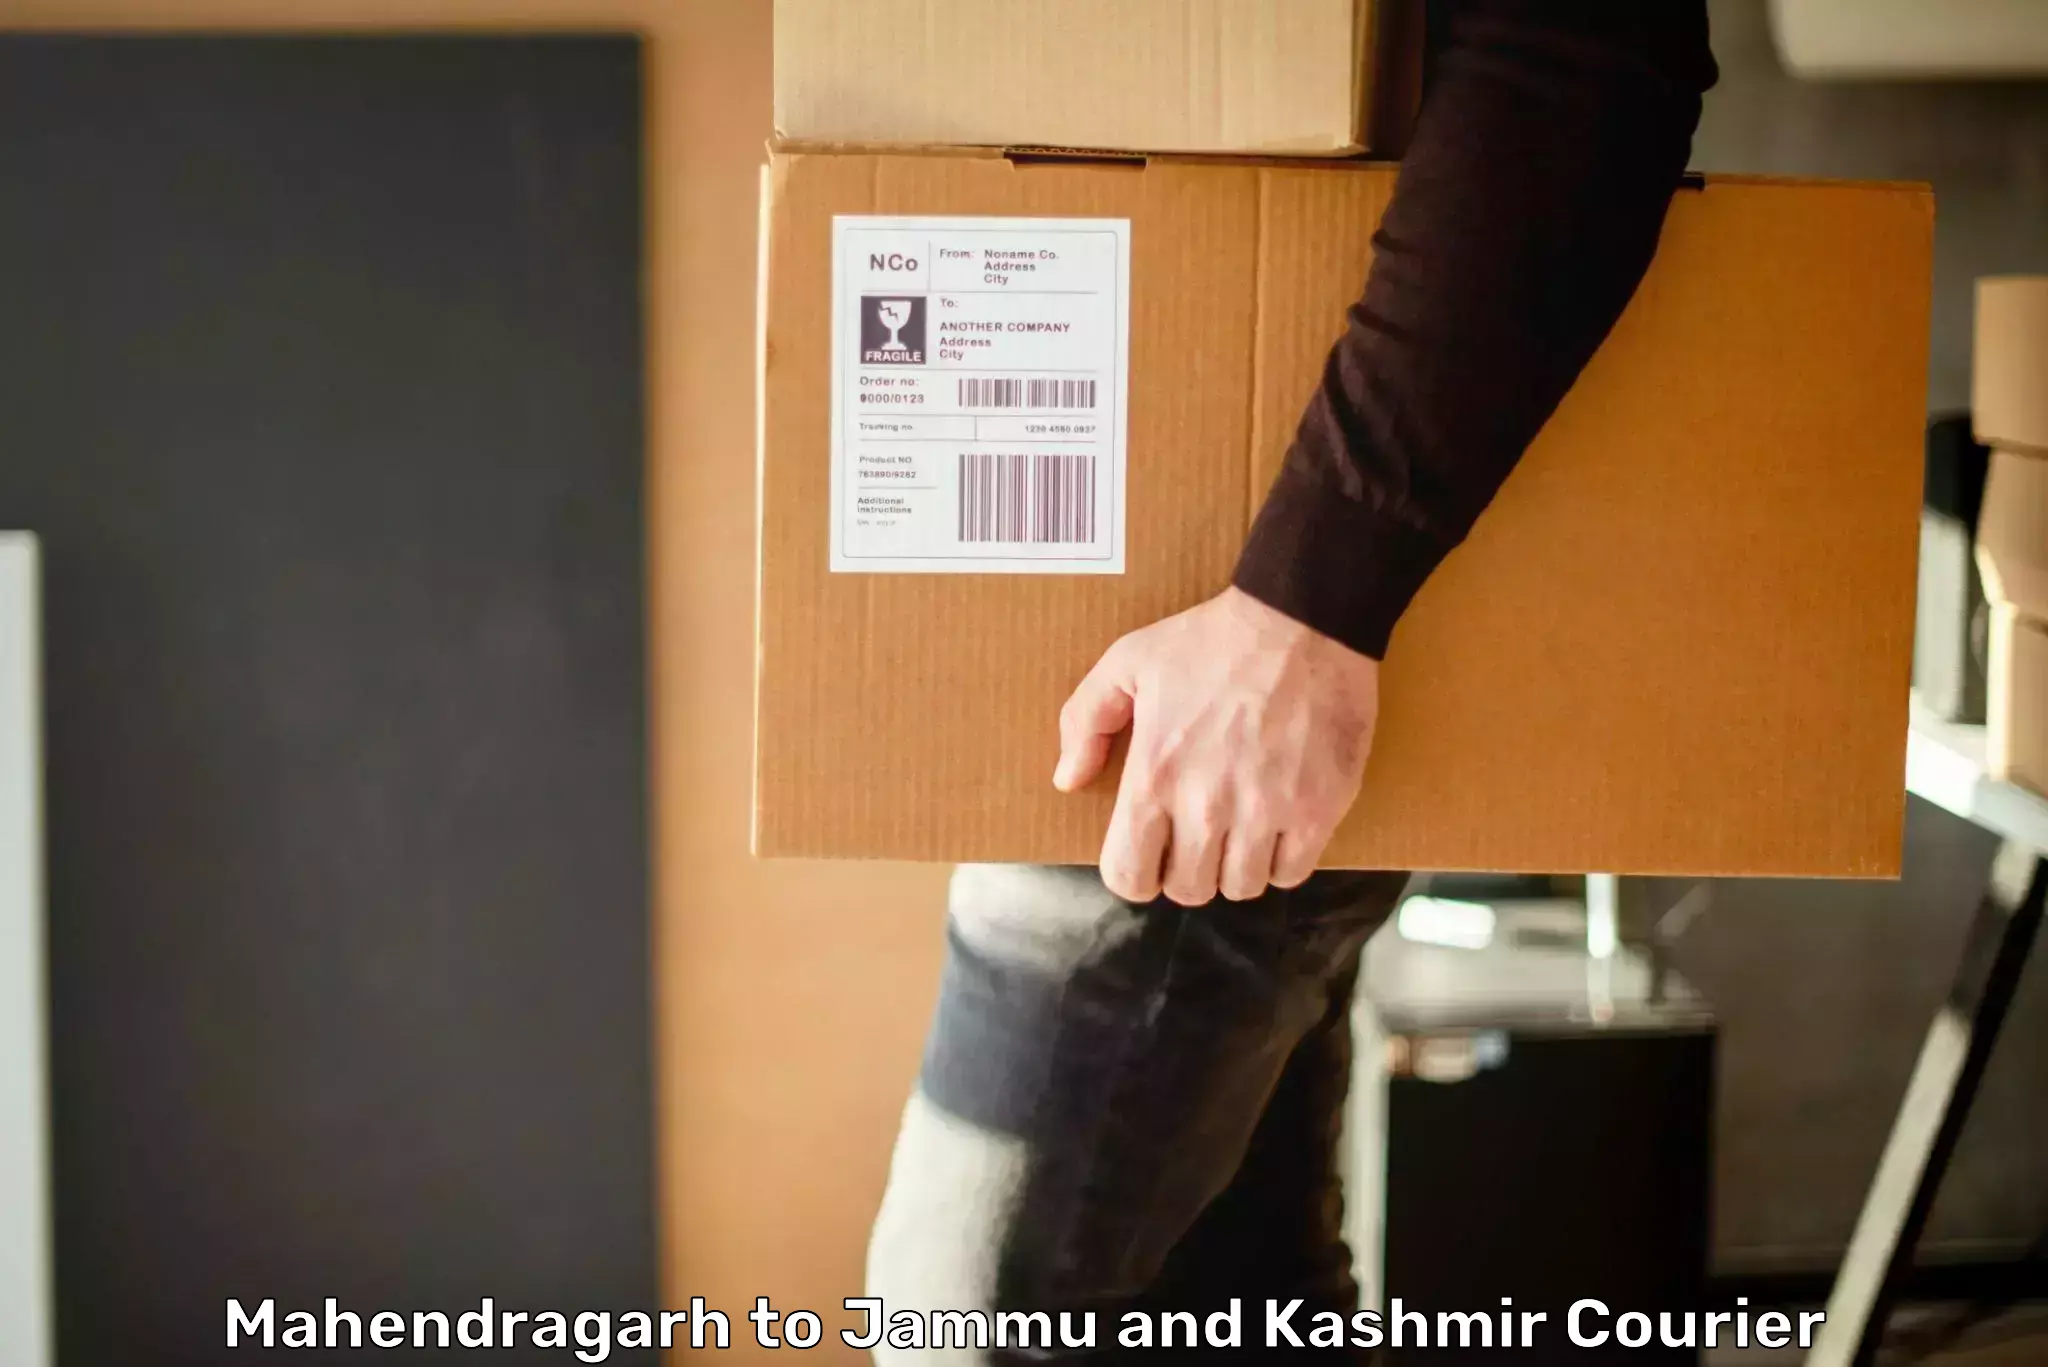 Reliable delivery network Mahendragarh to Shopian